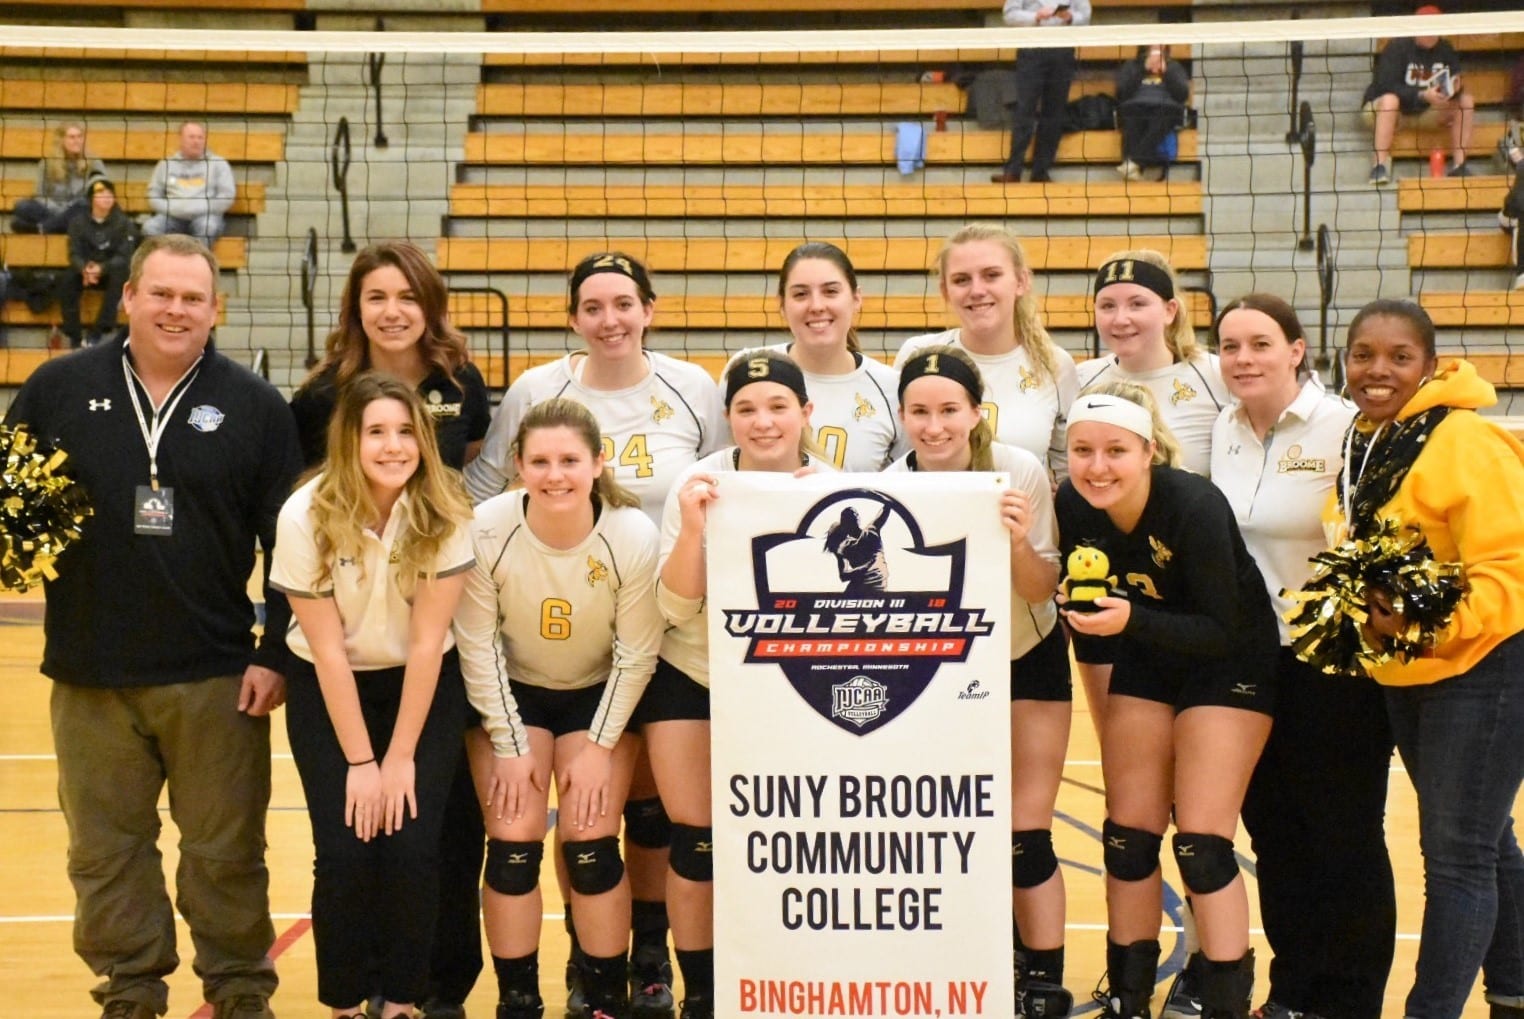 Hornet power! Celebrate SUNY Broome success on the court this Friday